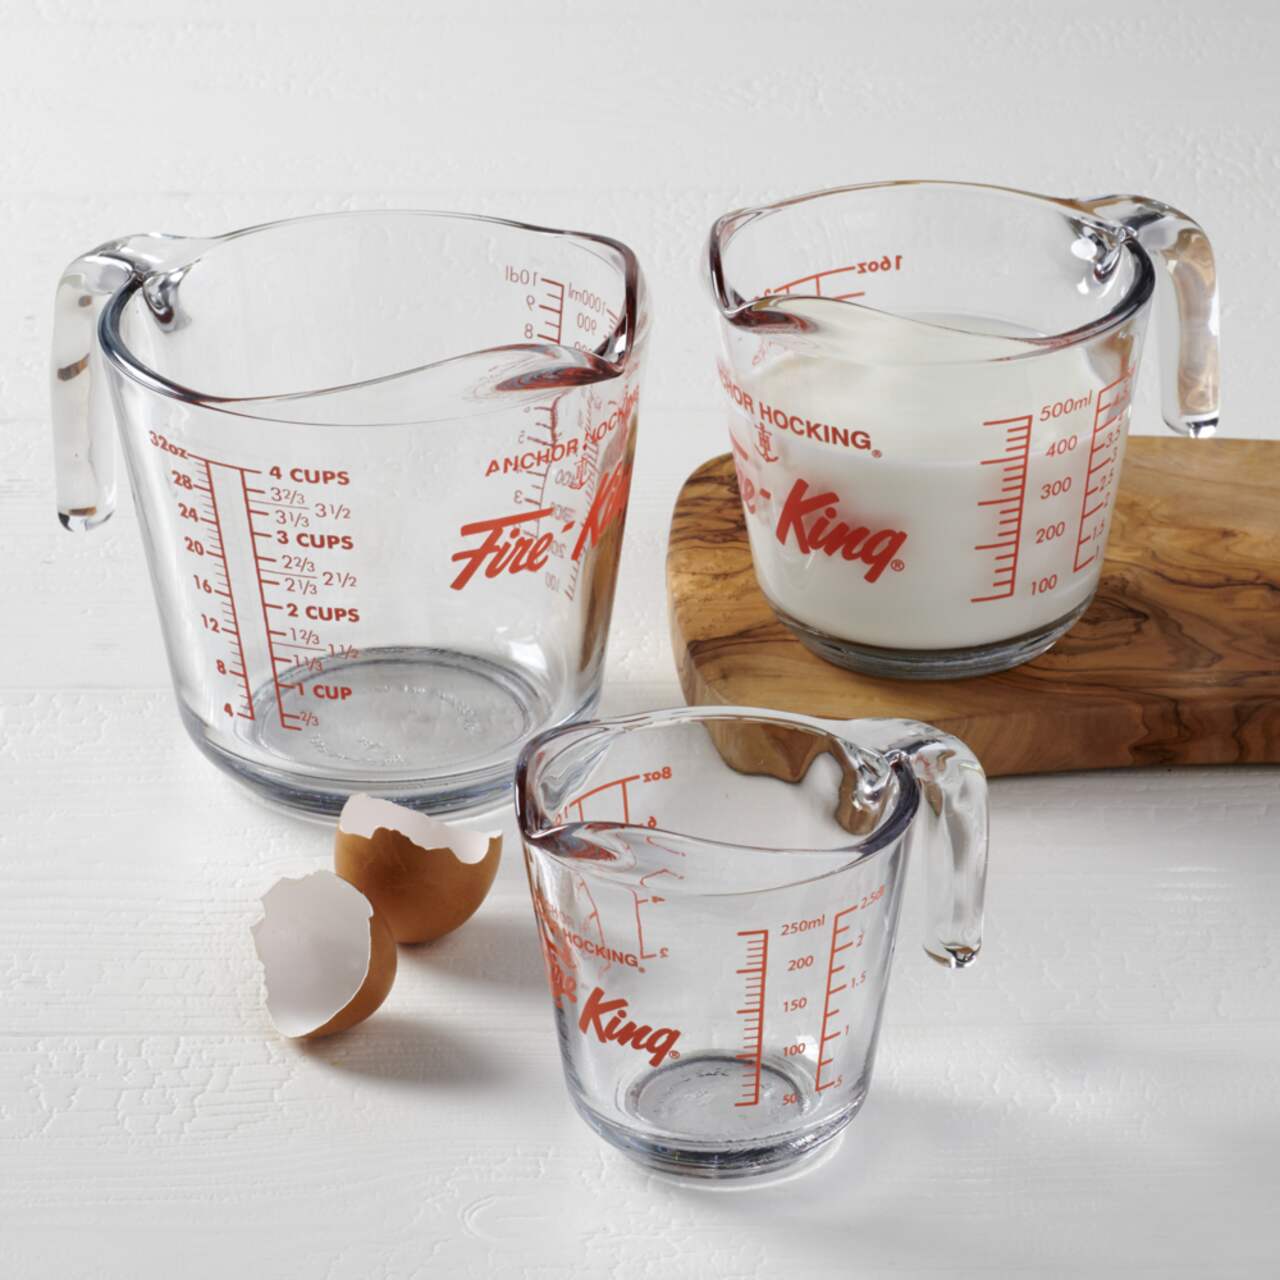 Anchor Hocking Glass Measuring Cup Set, Assorted Sizes, 3-pc